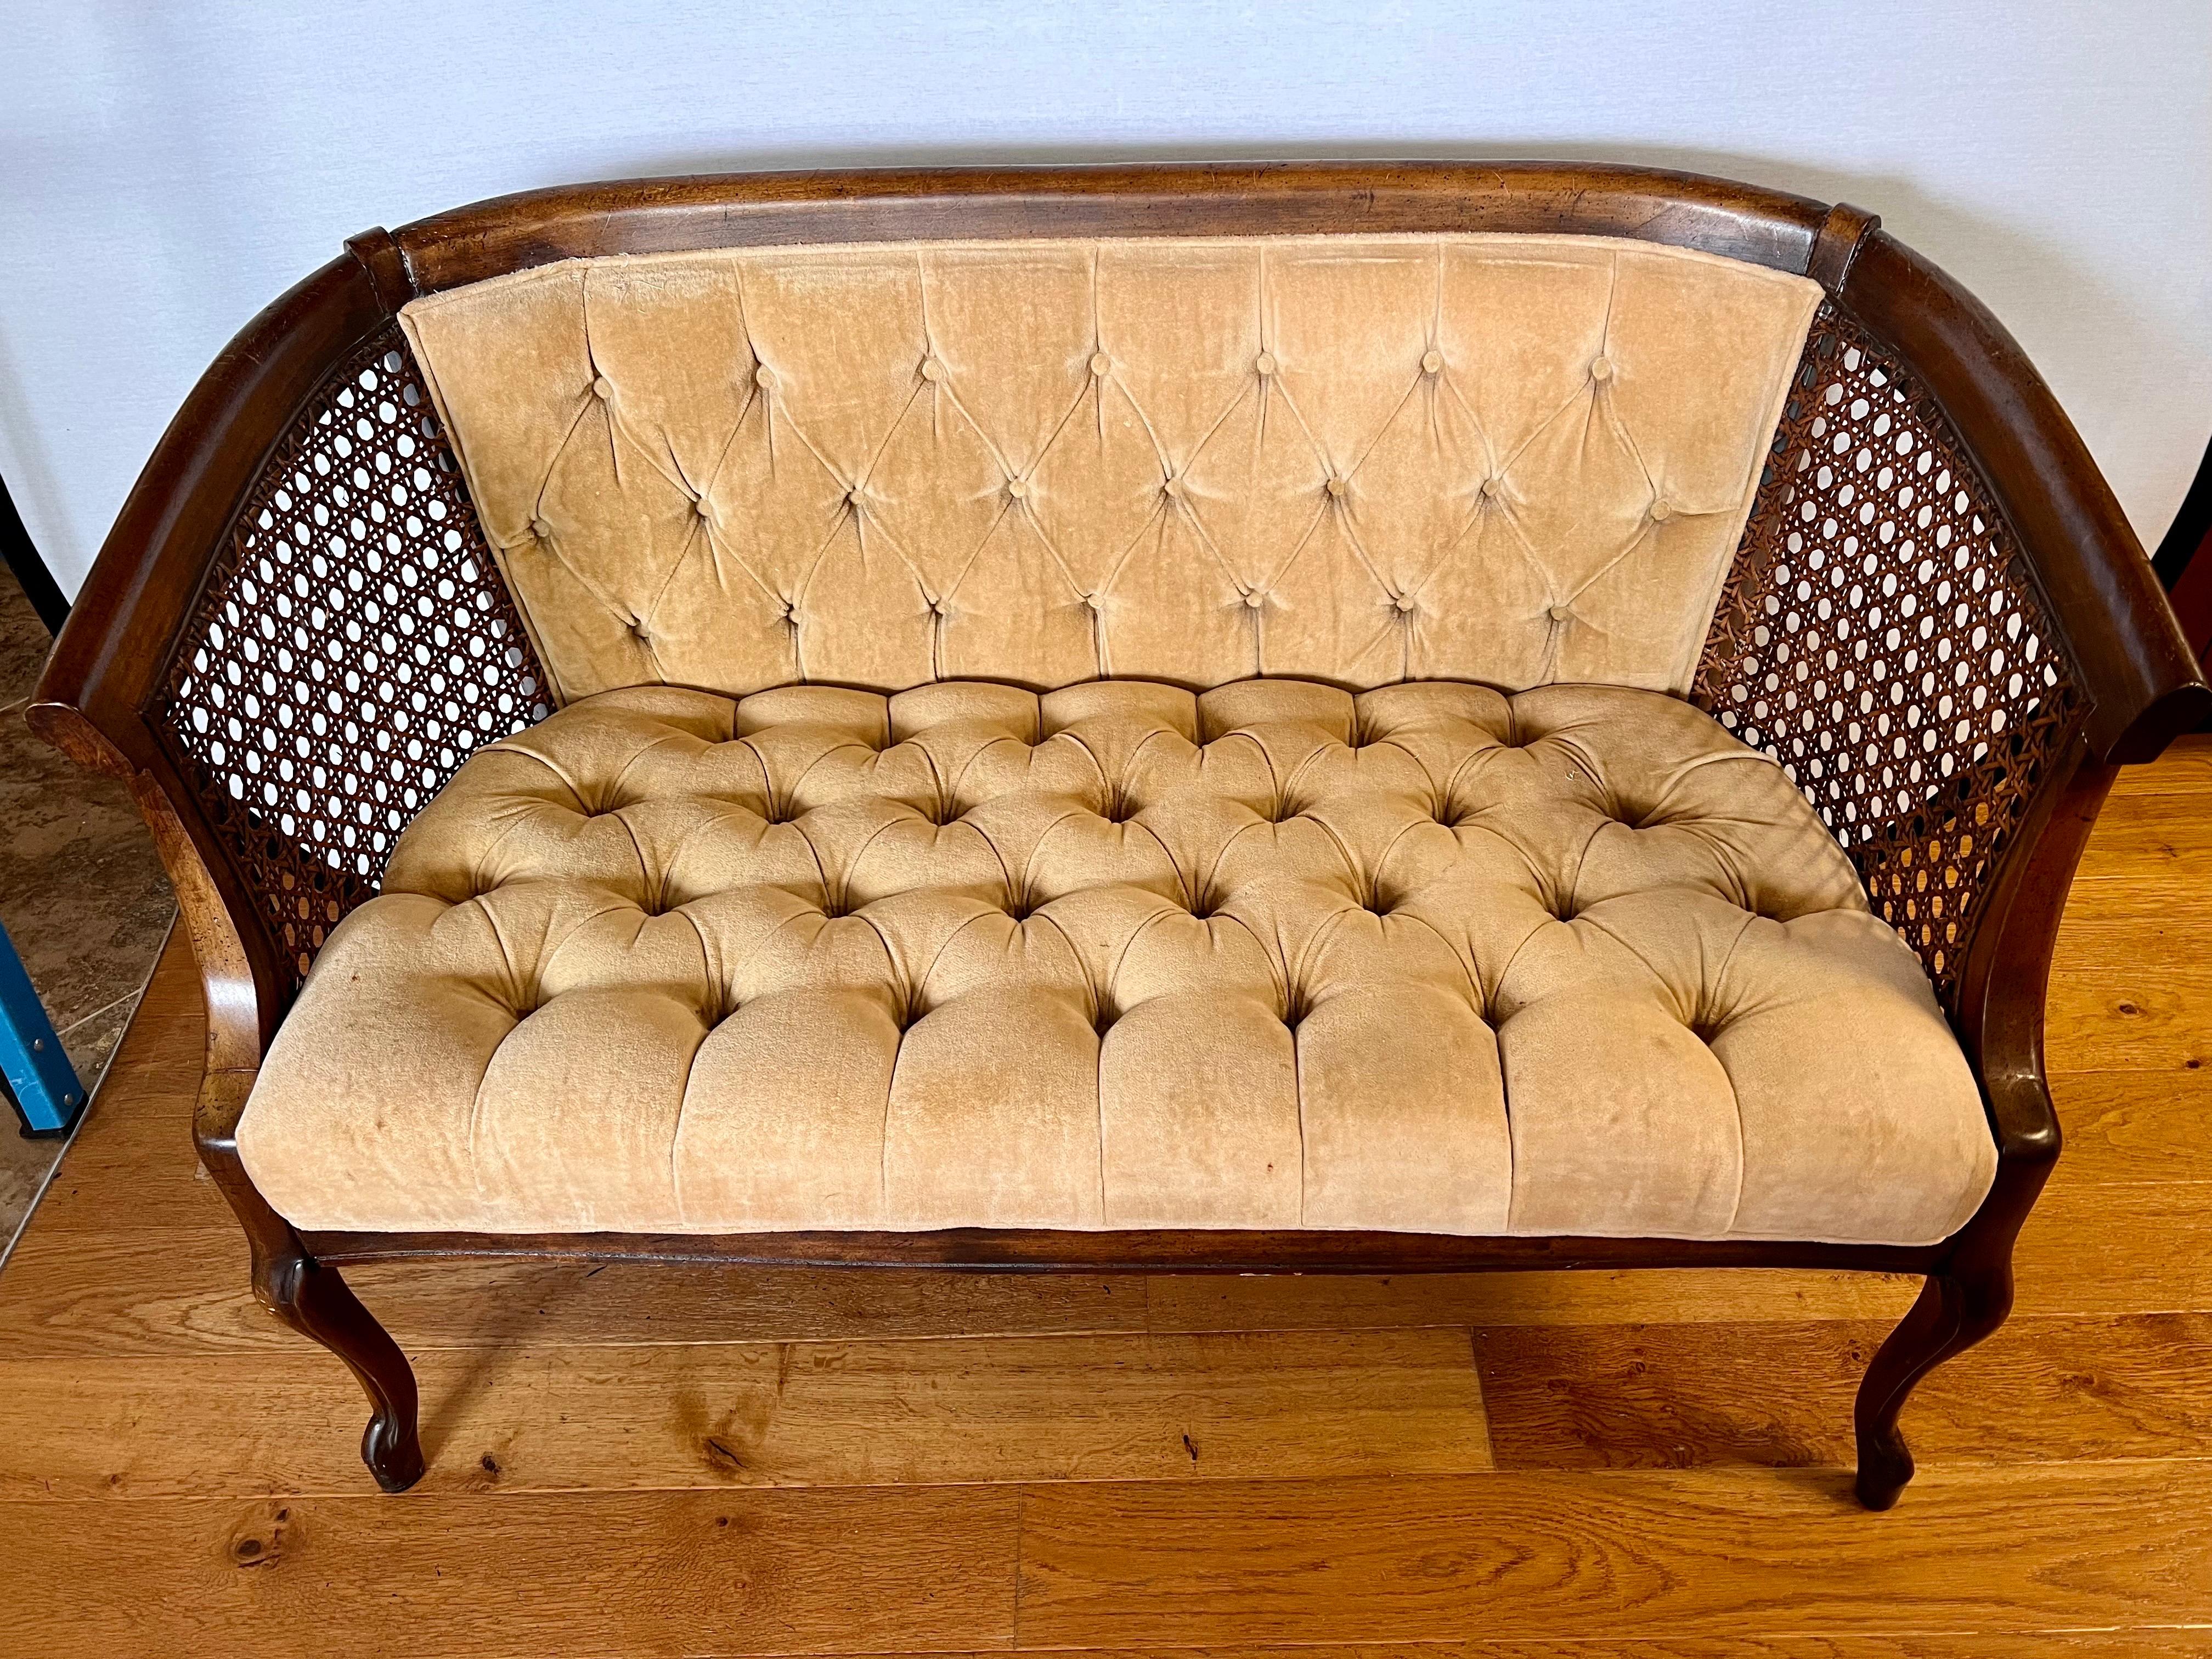 This settee combines the classic beauty of caned sides with tufted gold velvet upholstery.  The intricate caning, which is perfect, adds an air of elegance.  The fabric is original and has a few pulls but otherwise it is ok.